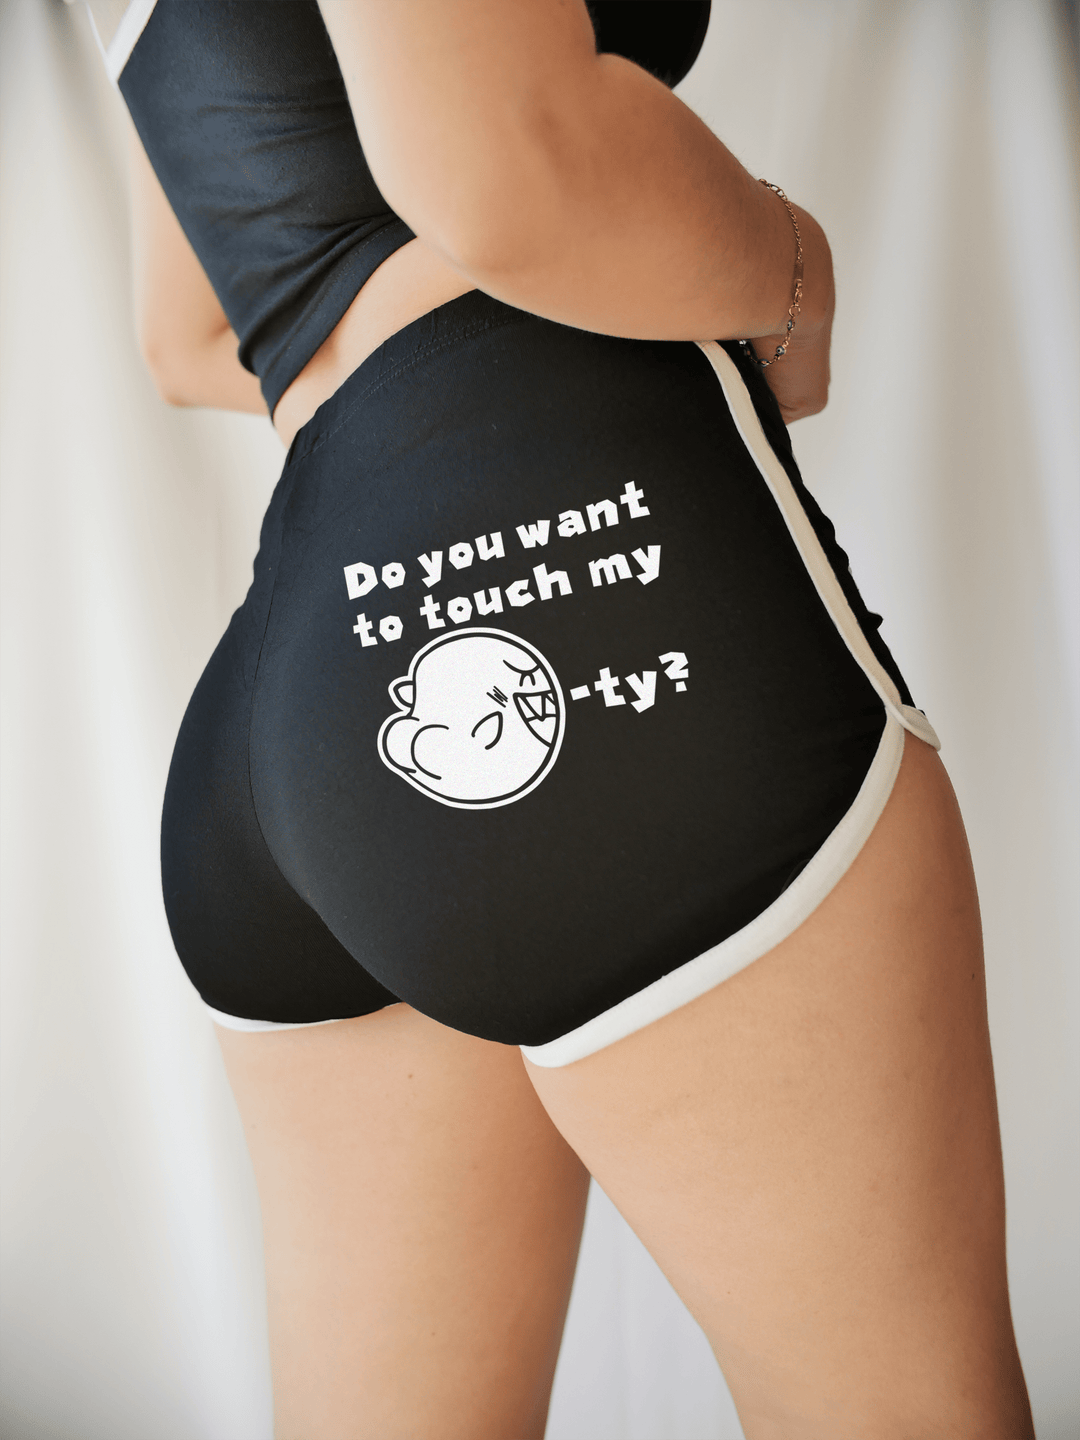 PixelThat Dolphin Shorts Black / S Do You Want To Touch My Boo-ty? Dolphin Shorts